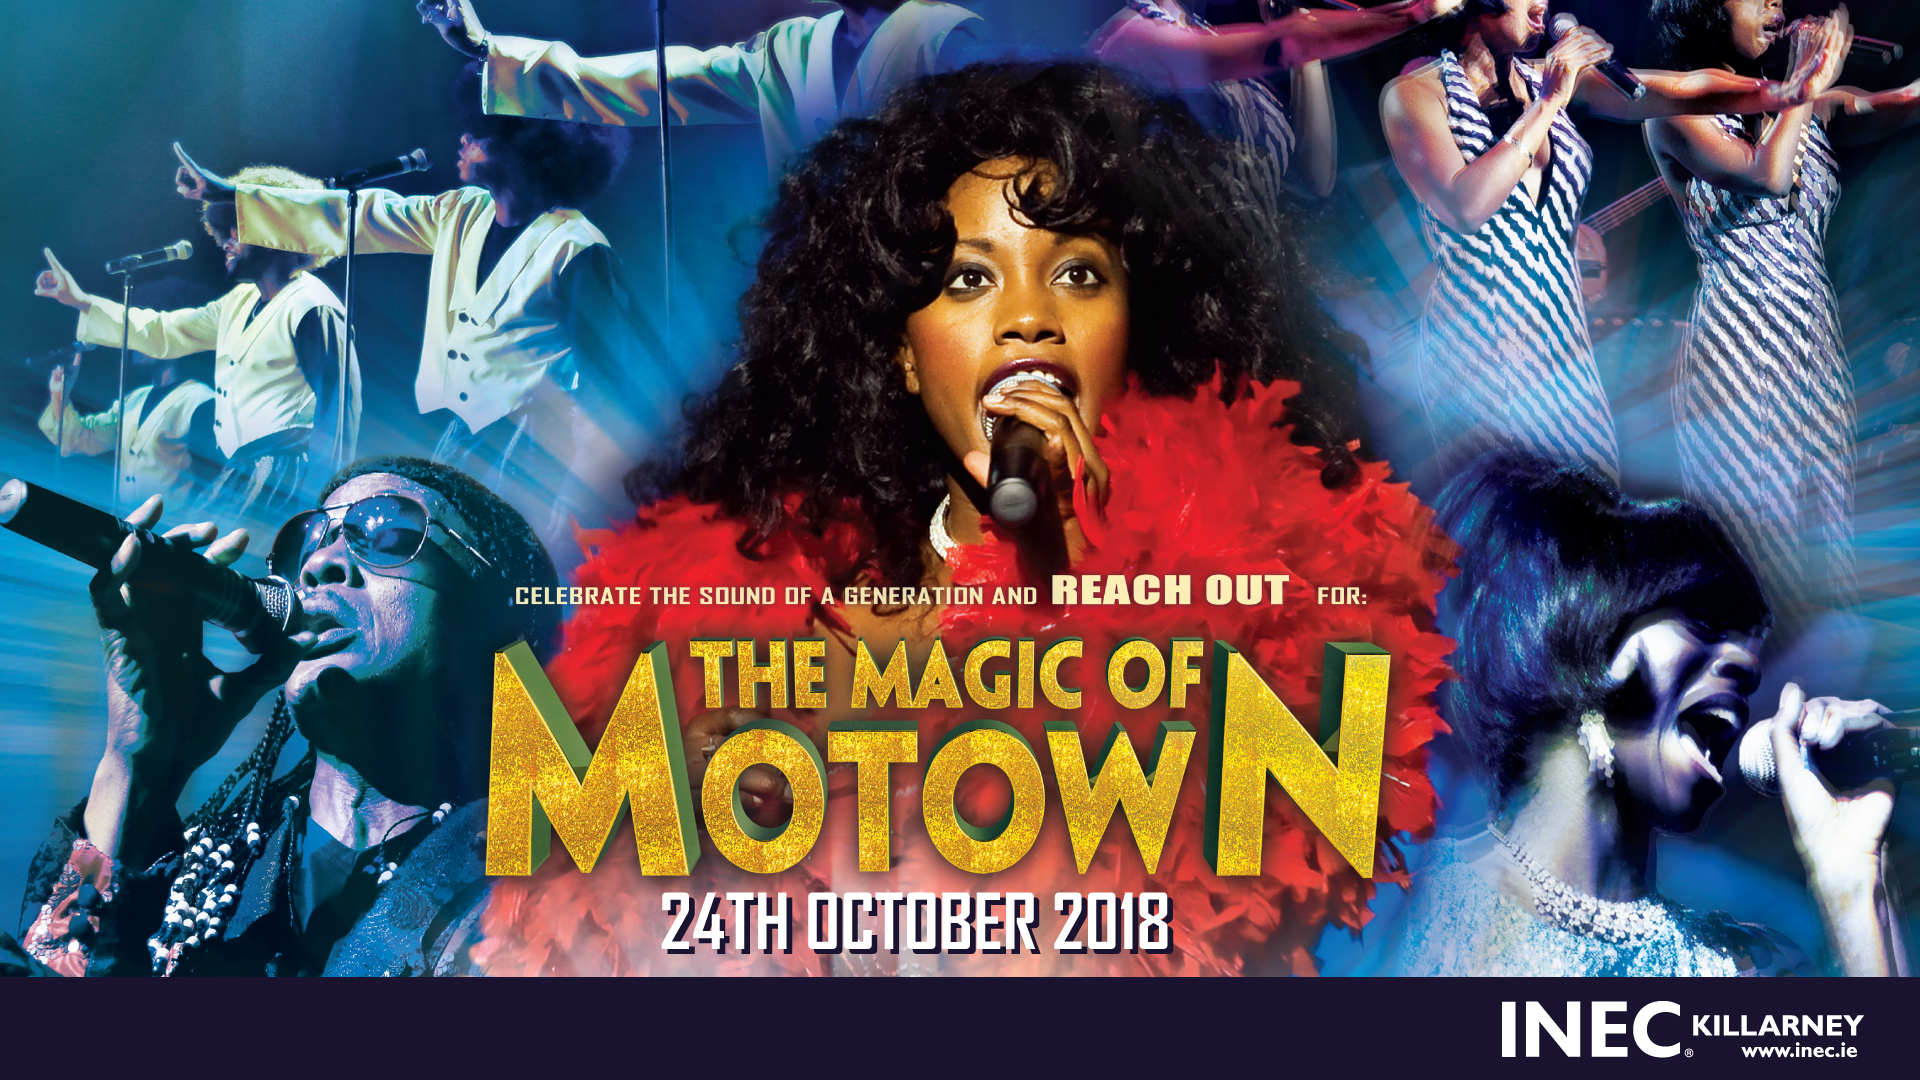 The Magic of Motown comes to the INEC Killarney on October 24th